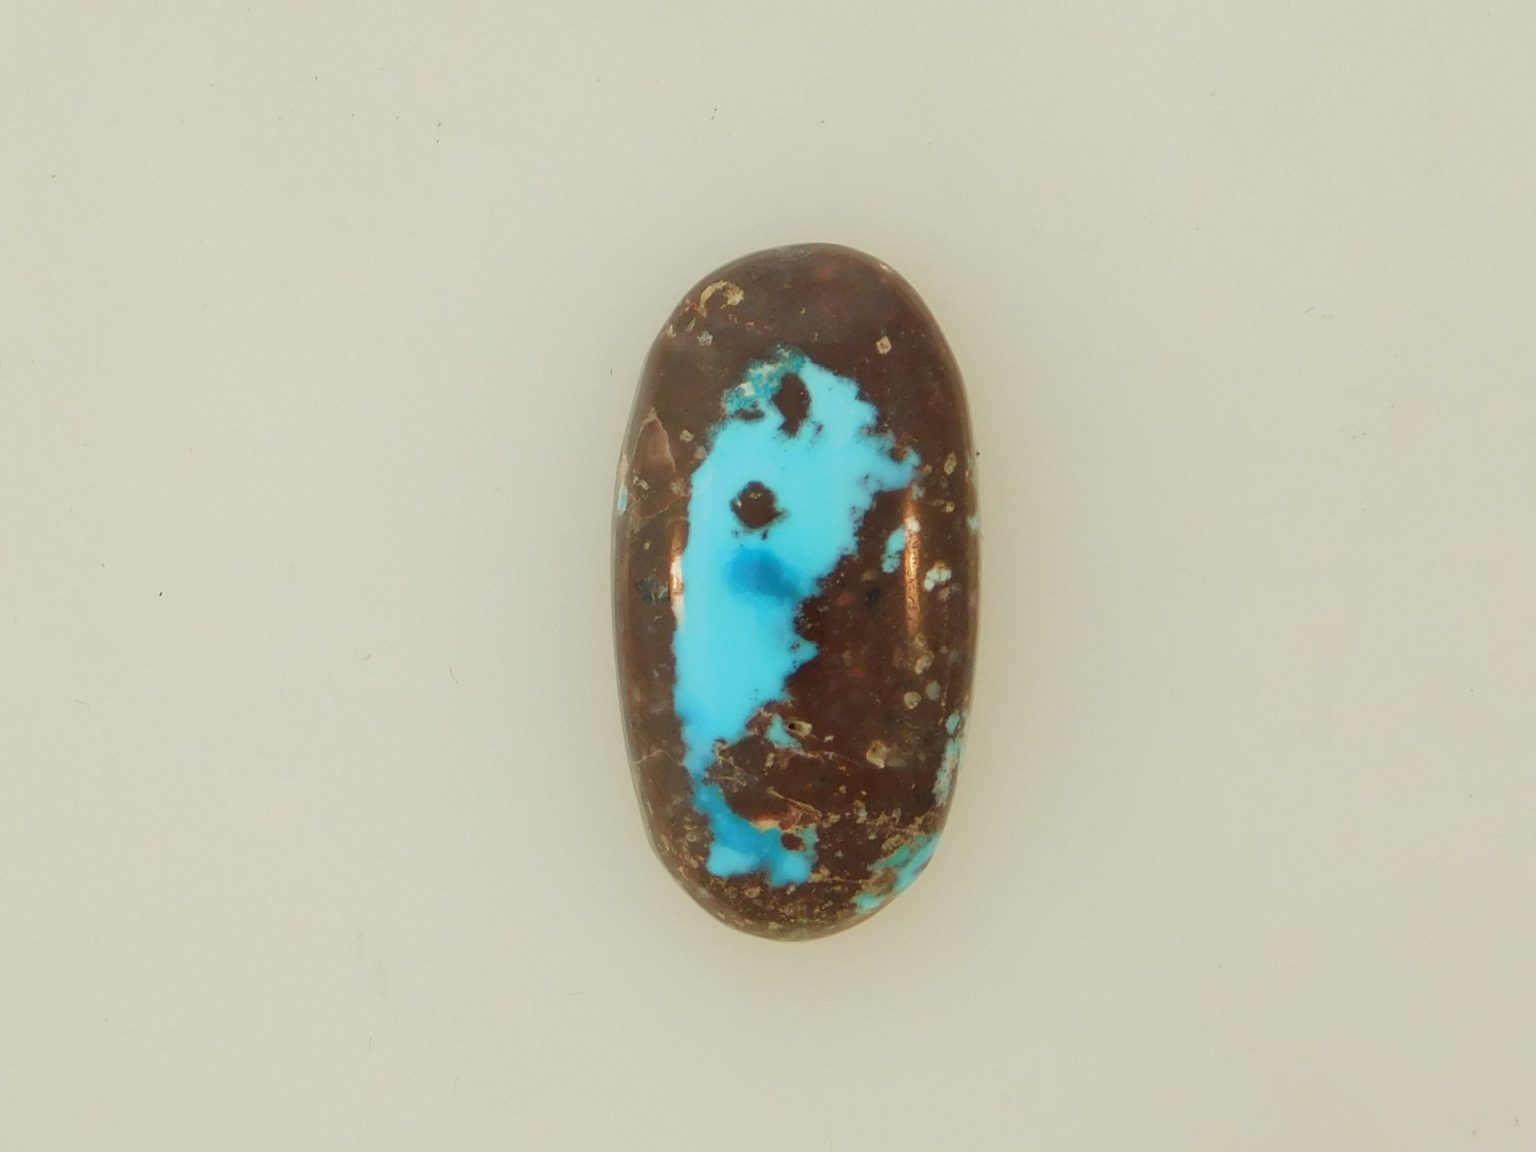 BLUE BISBEE TURQUOISE with blue and dark blue pools in dark brown host 20.5 carats